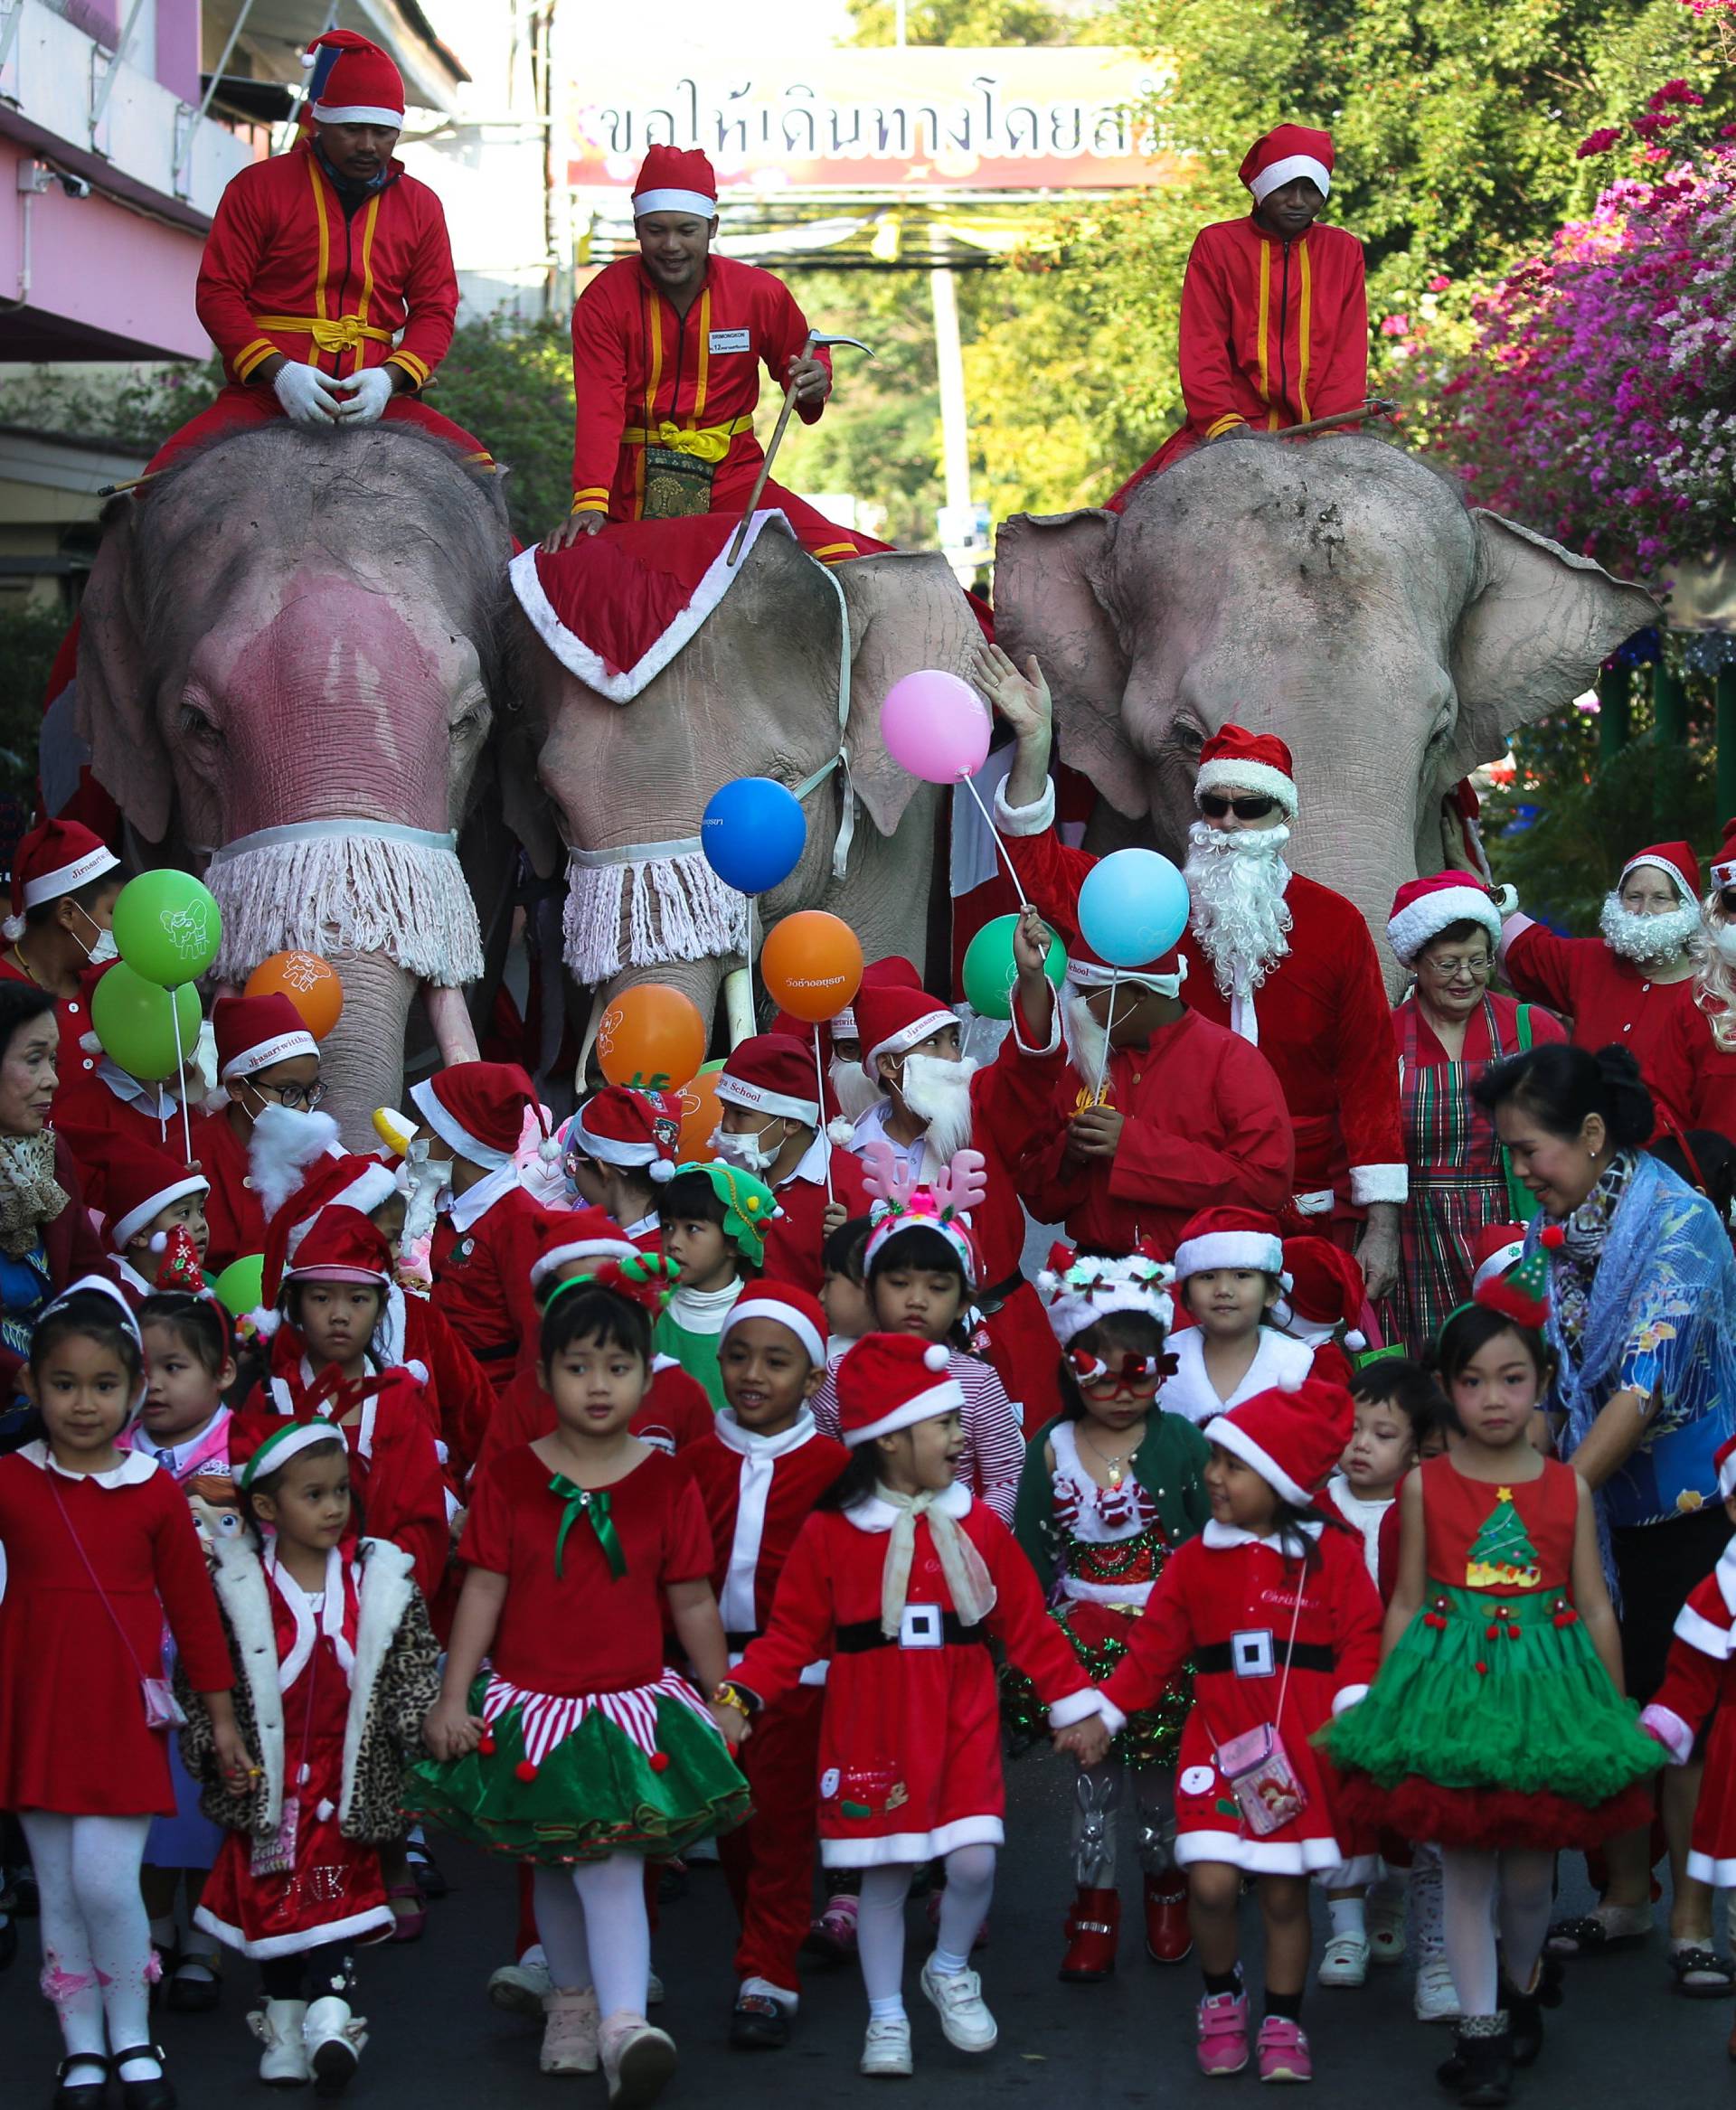 Elephants, teachers and students dressed in Santa Claus costumes parade during Christmas celebrations at Jirasart school in Ayutthaya